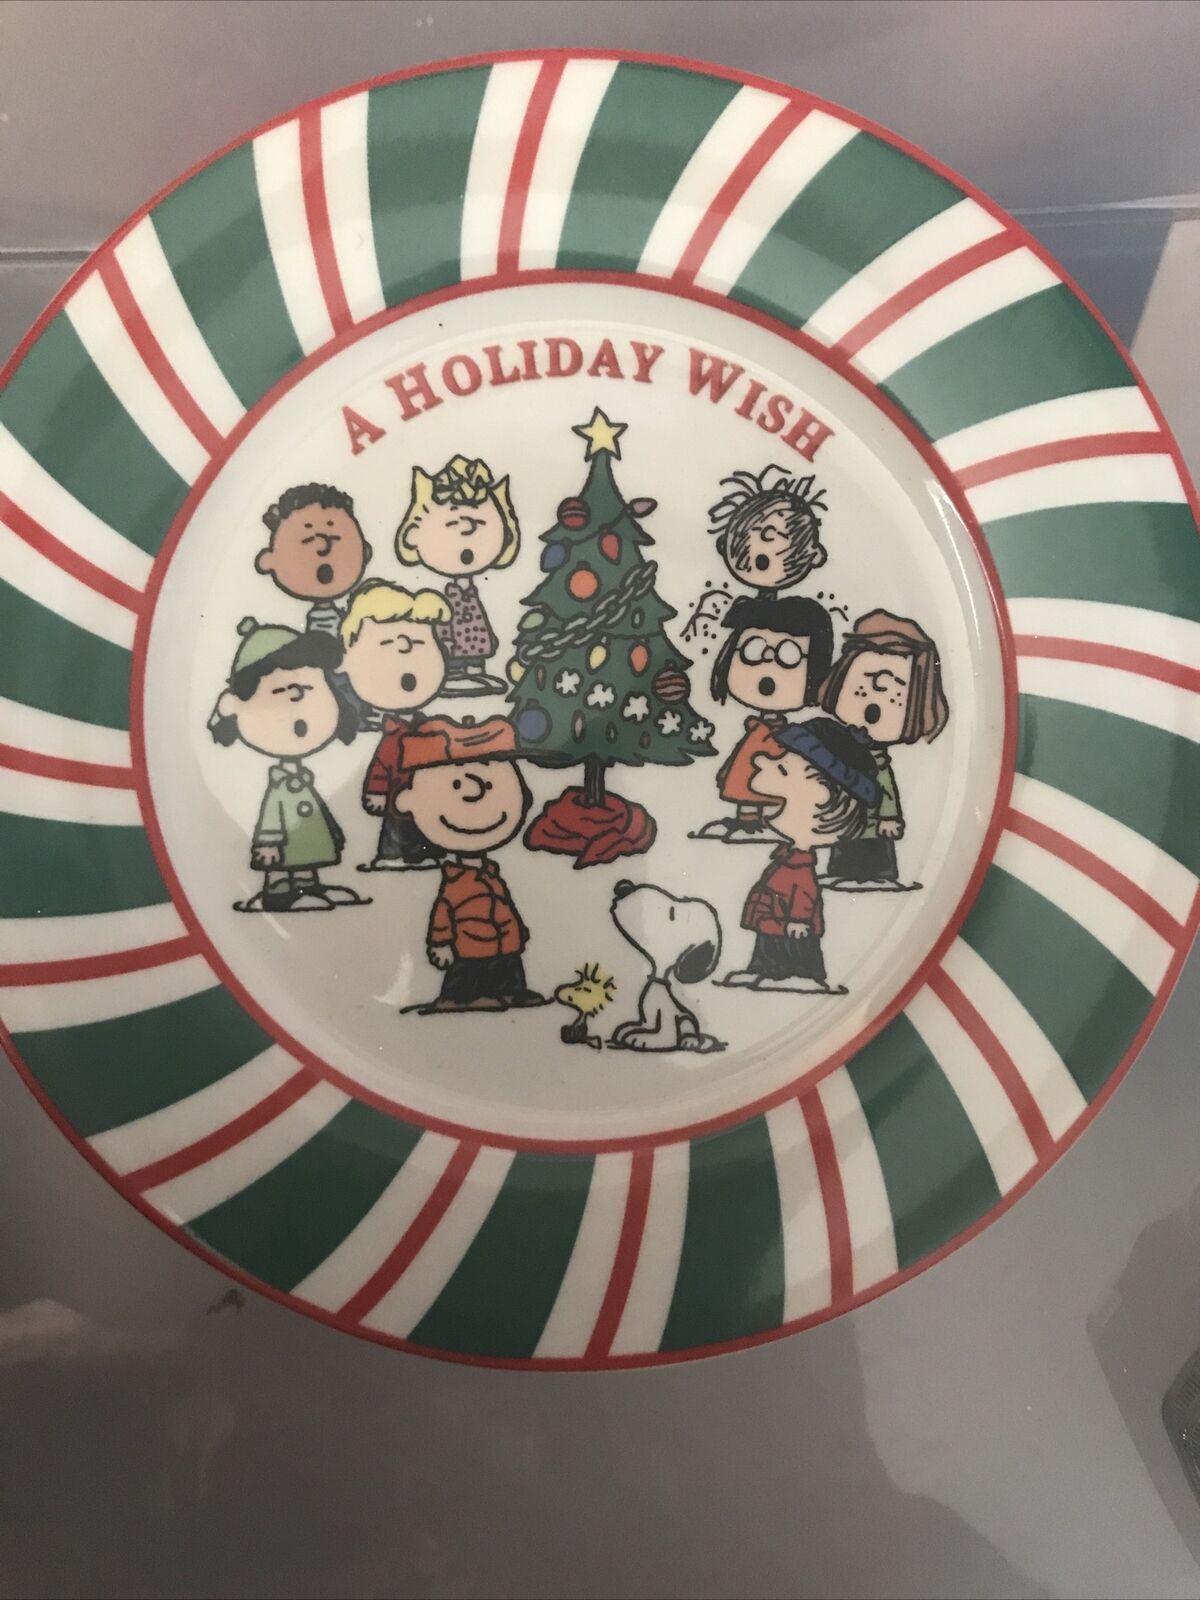 Snoopy Peanuts A Holiday Wish Christmas Holiday Plate 7”